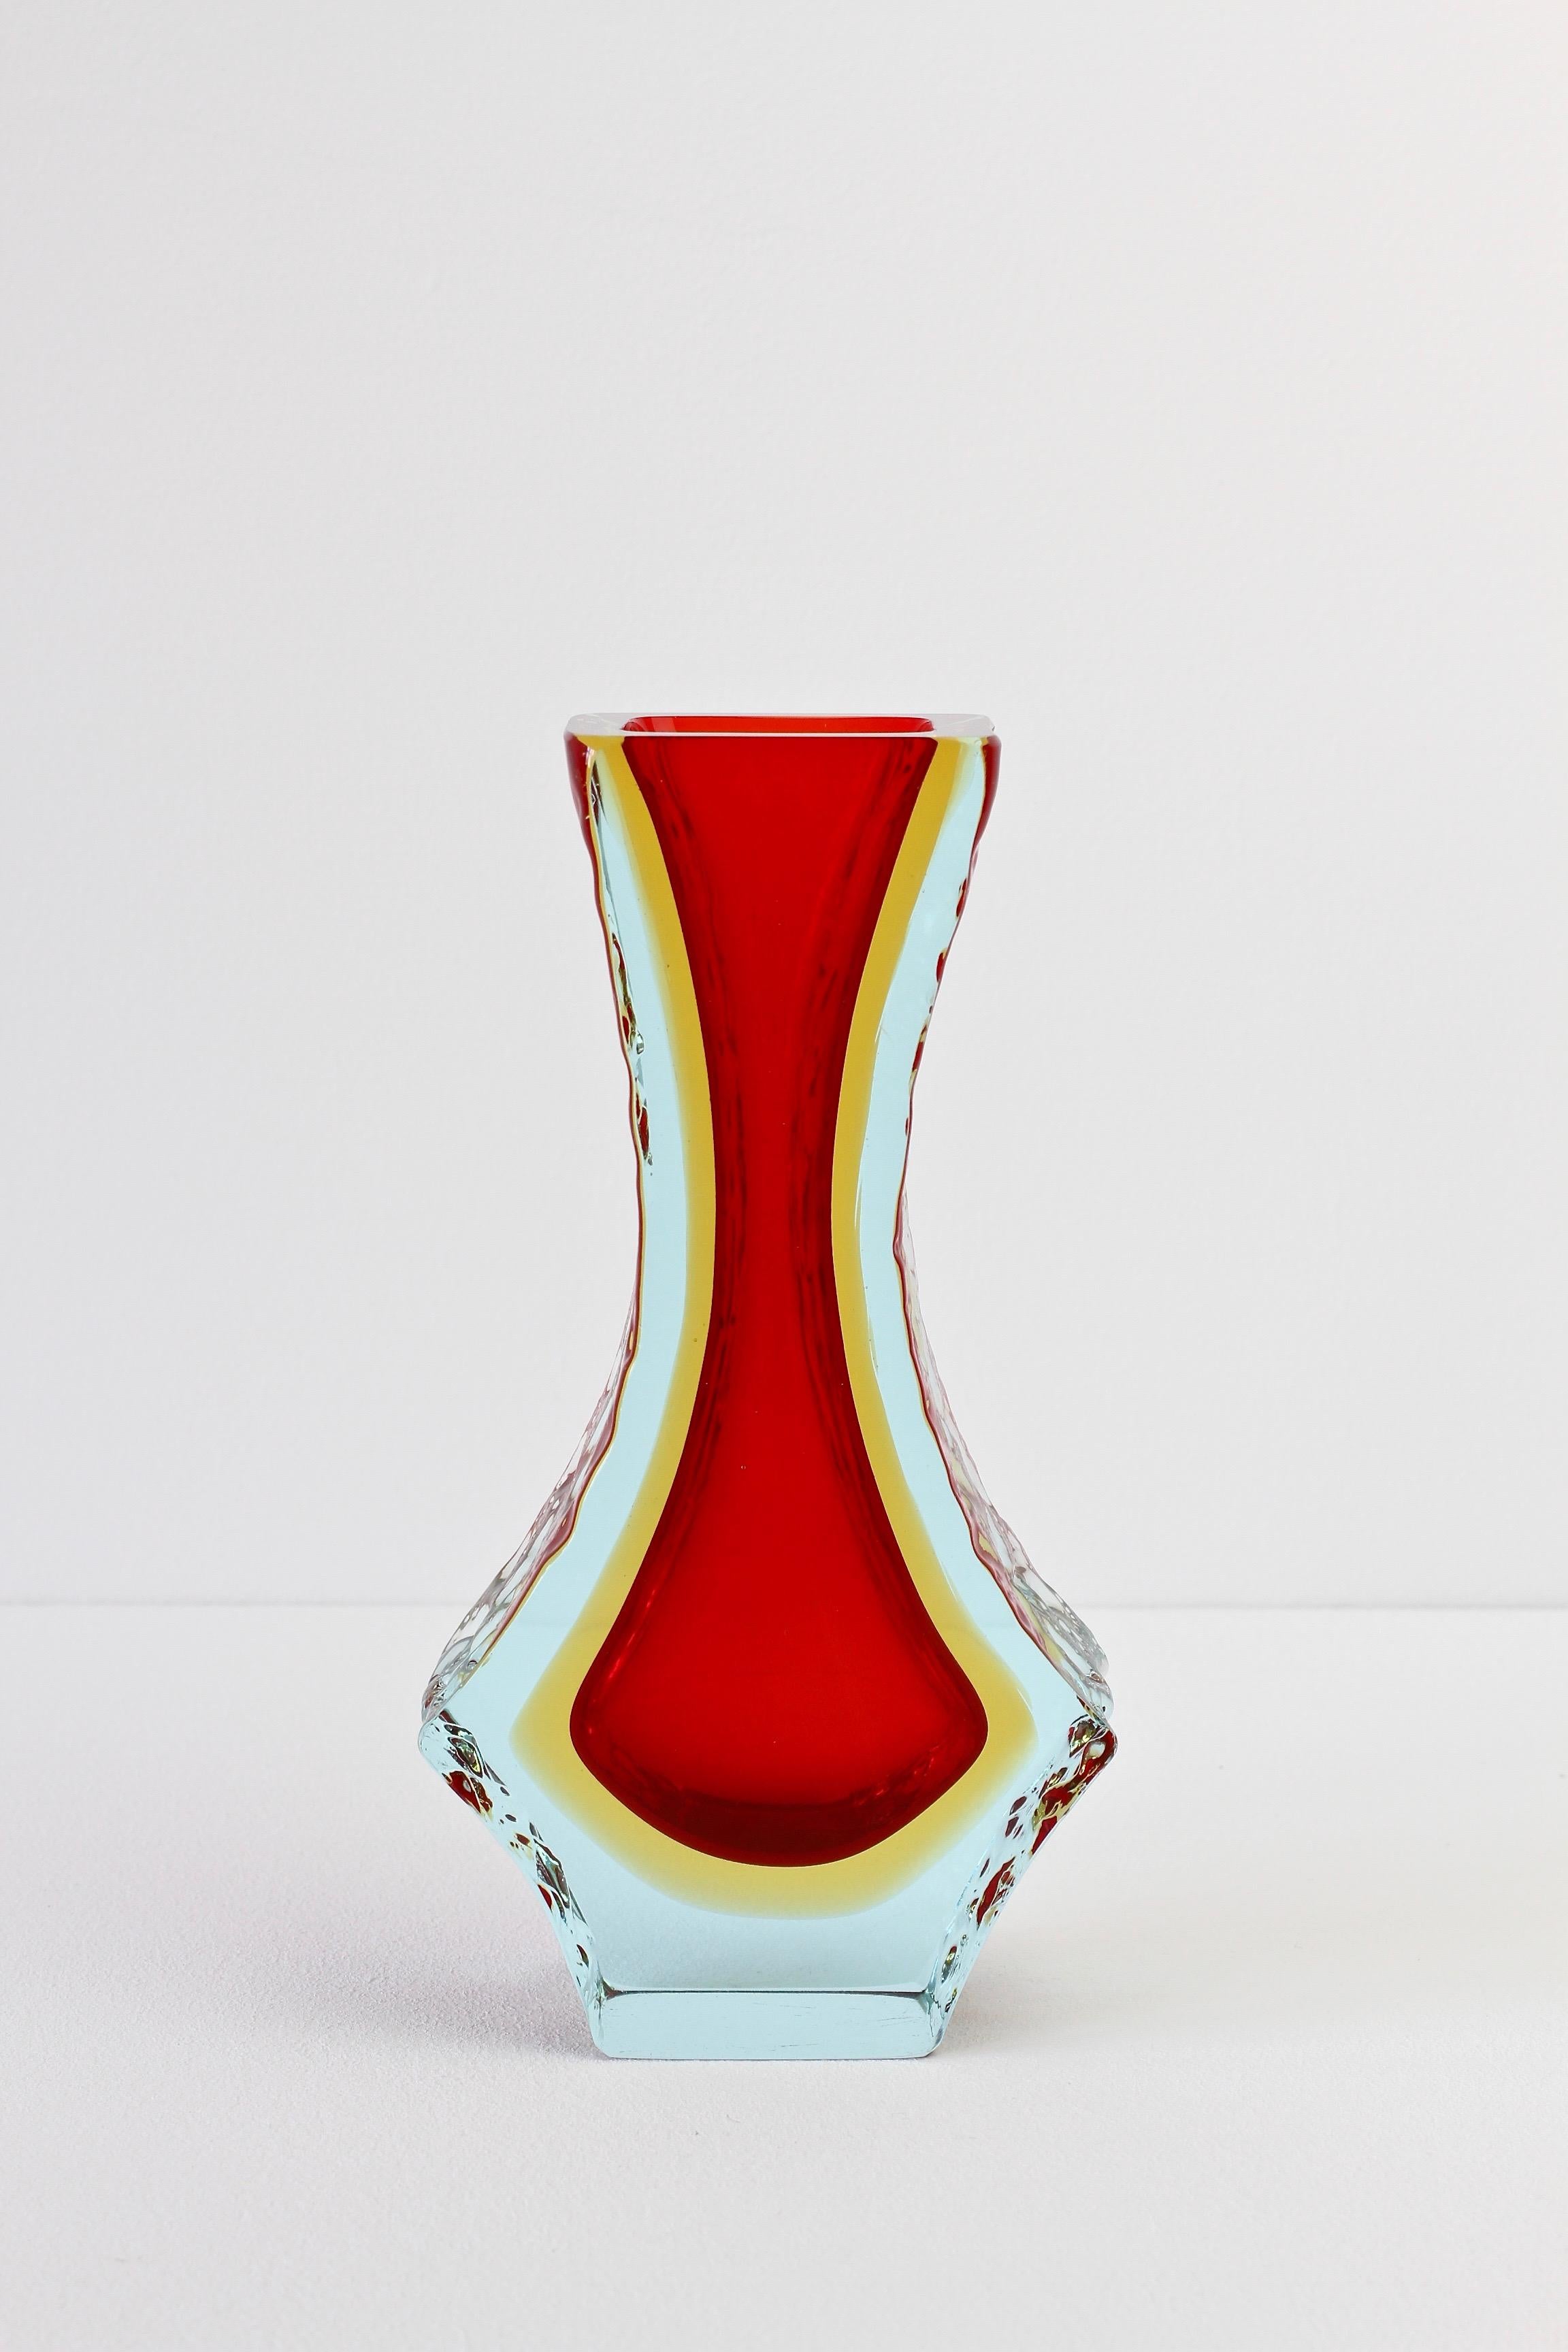 Italian Textured Faceted Murano 'Sommerso' Glass Vase Attributed to Mandruzzato 1